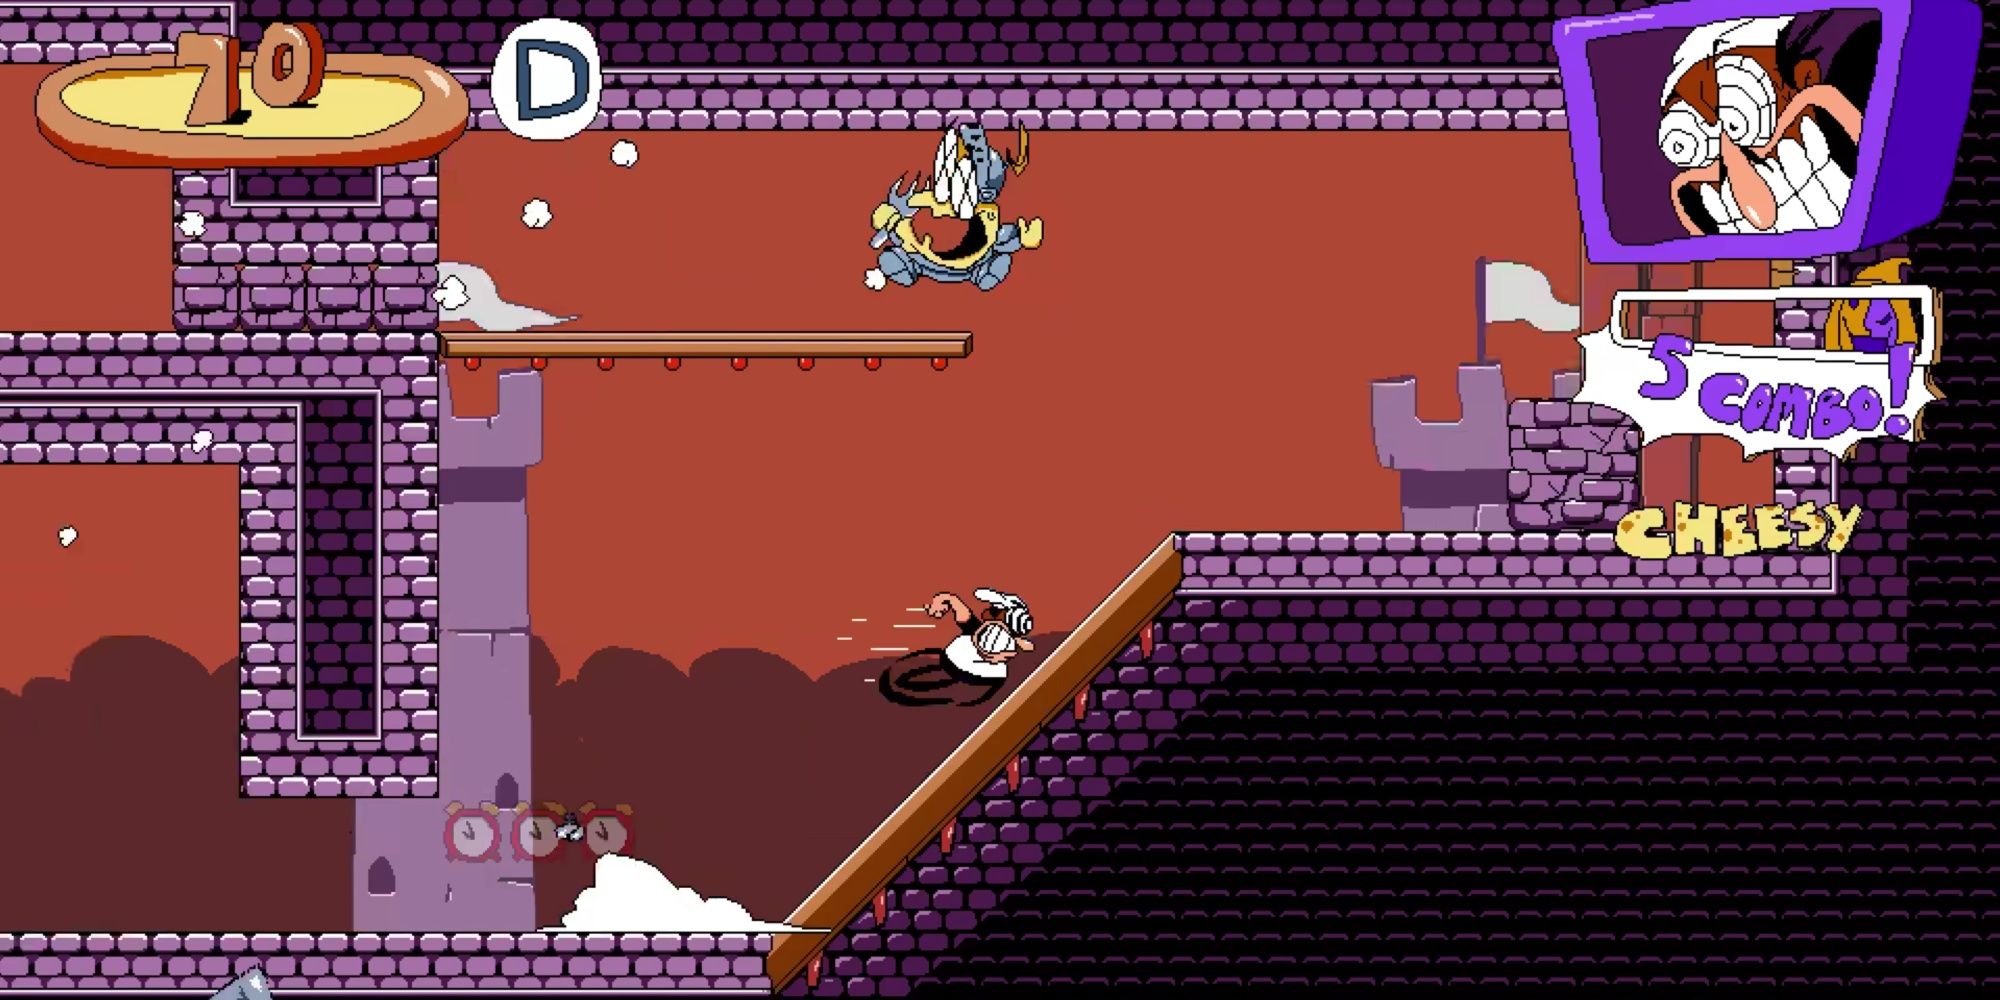 The main protagonist Peppino going up an incline ramp at a fast speed with an enemy launched in the air and "Cheesy" displayed on the screen.